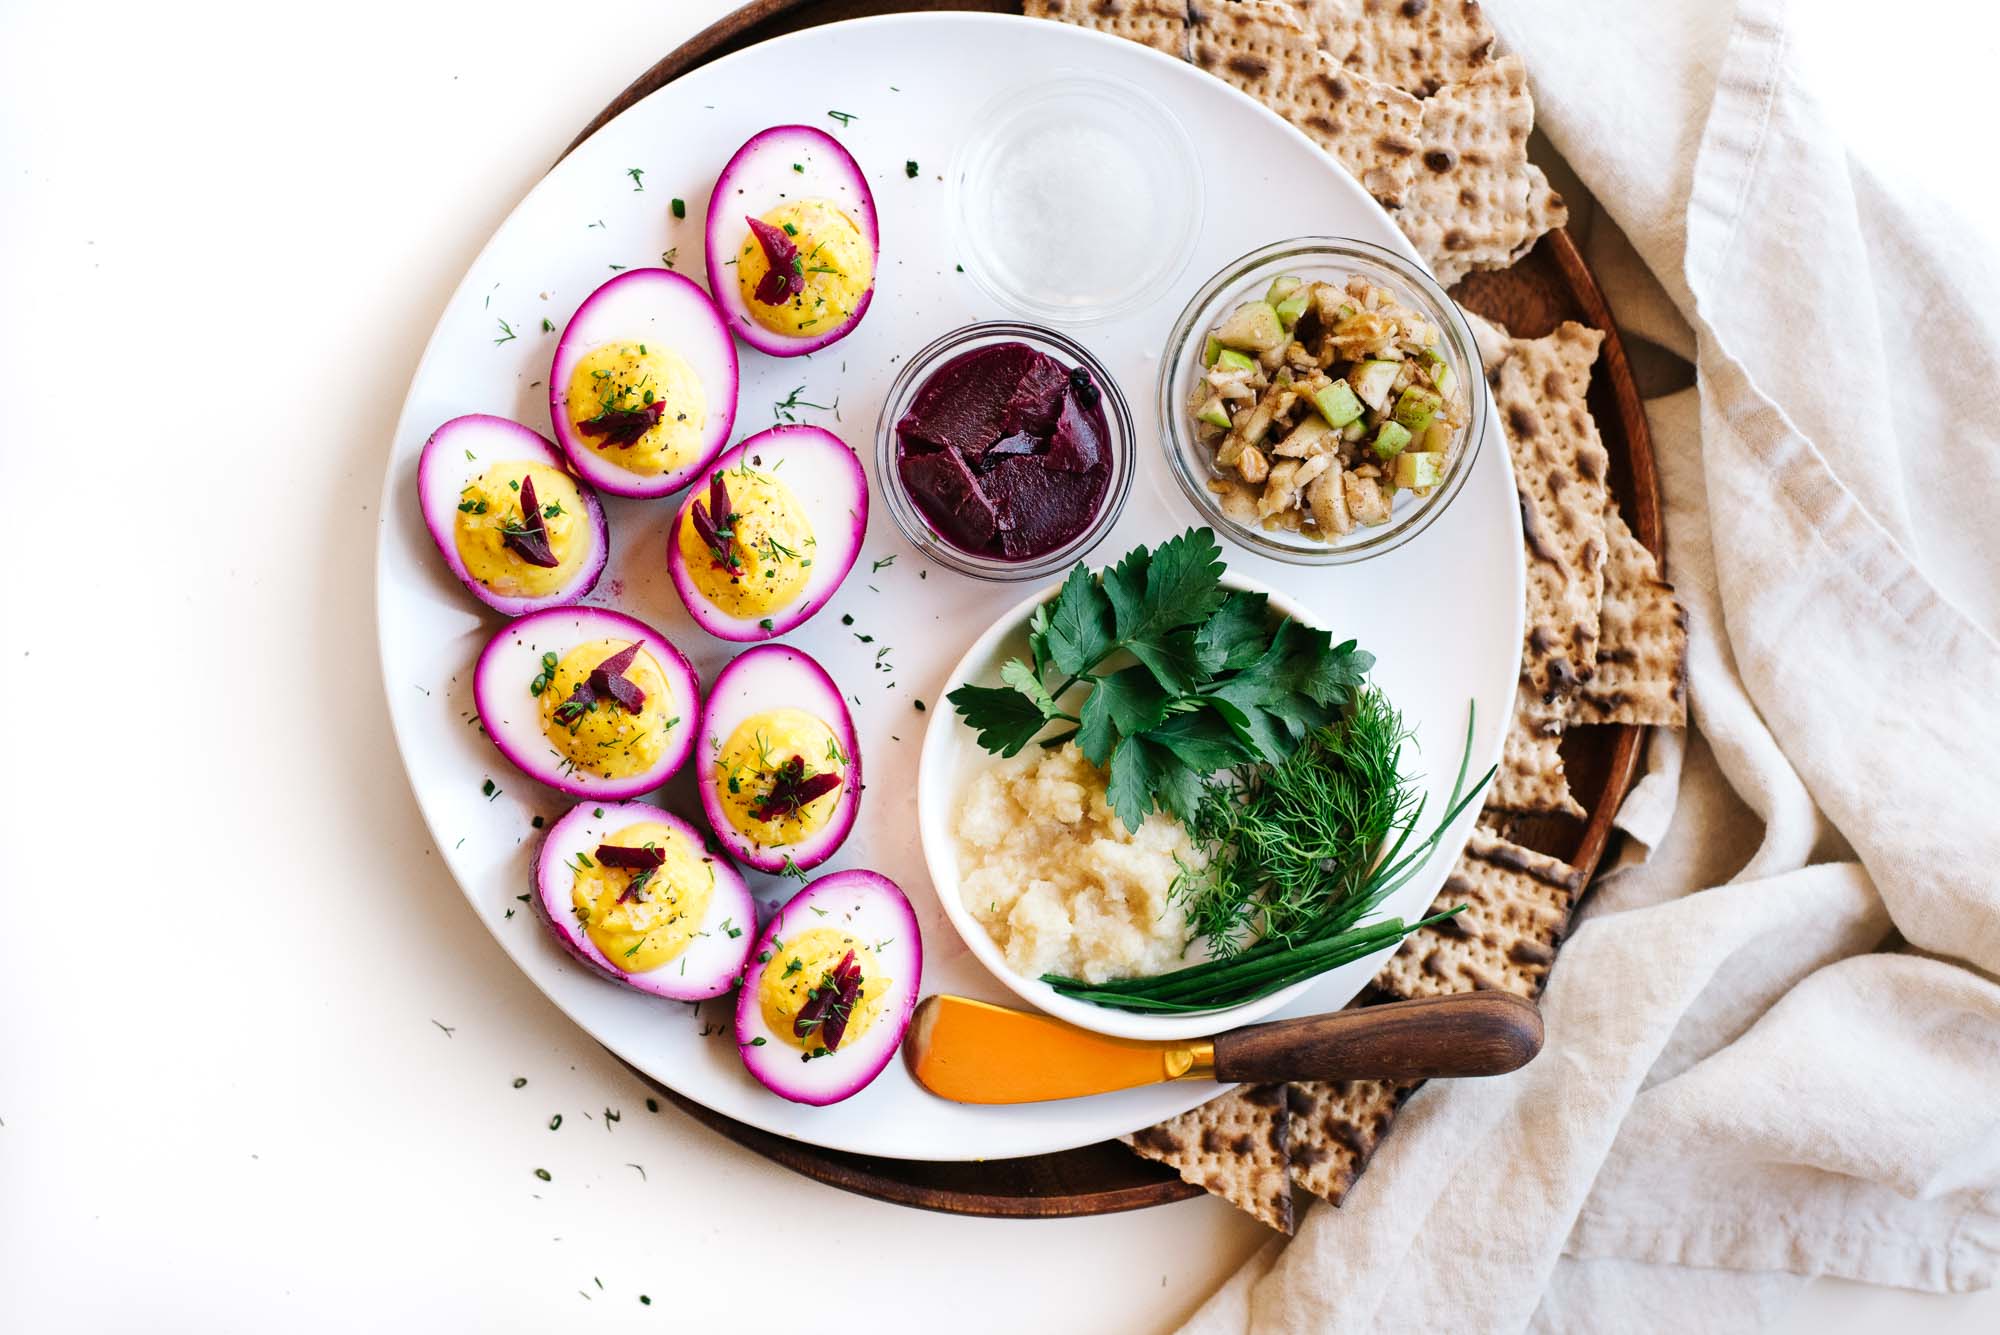 VEGETARIAN PASSOVER SEDER PLATE WITH BEET-PICKLED DEVILED EGGS.